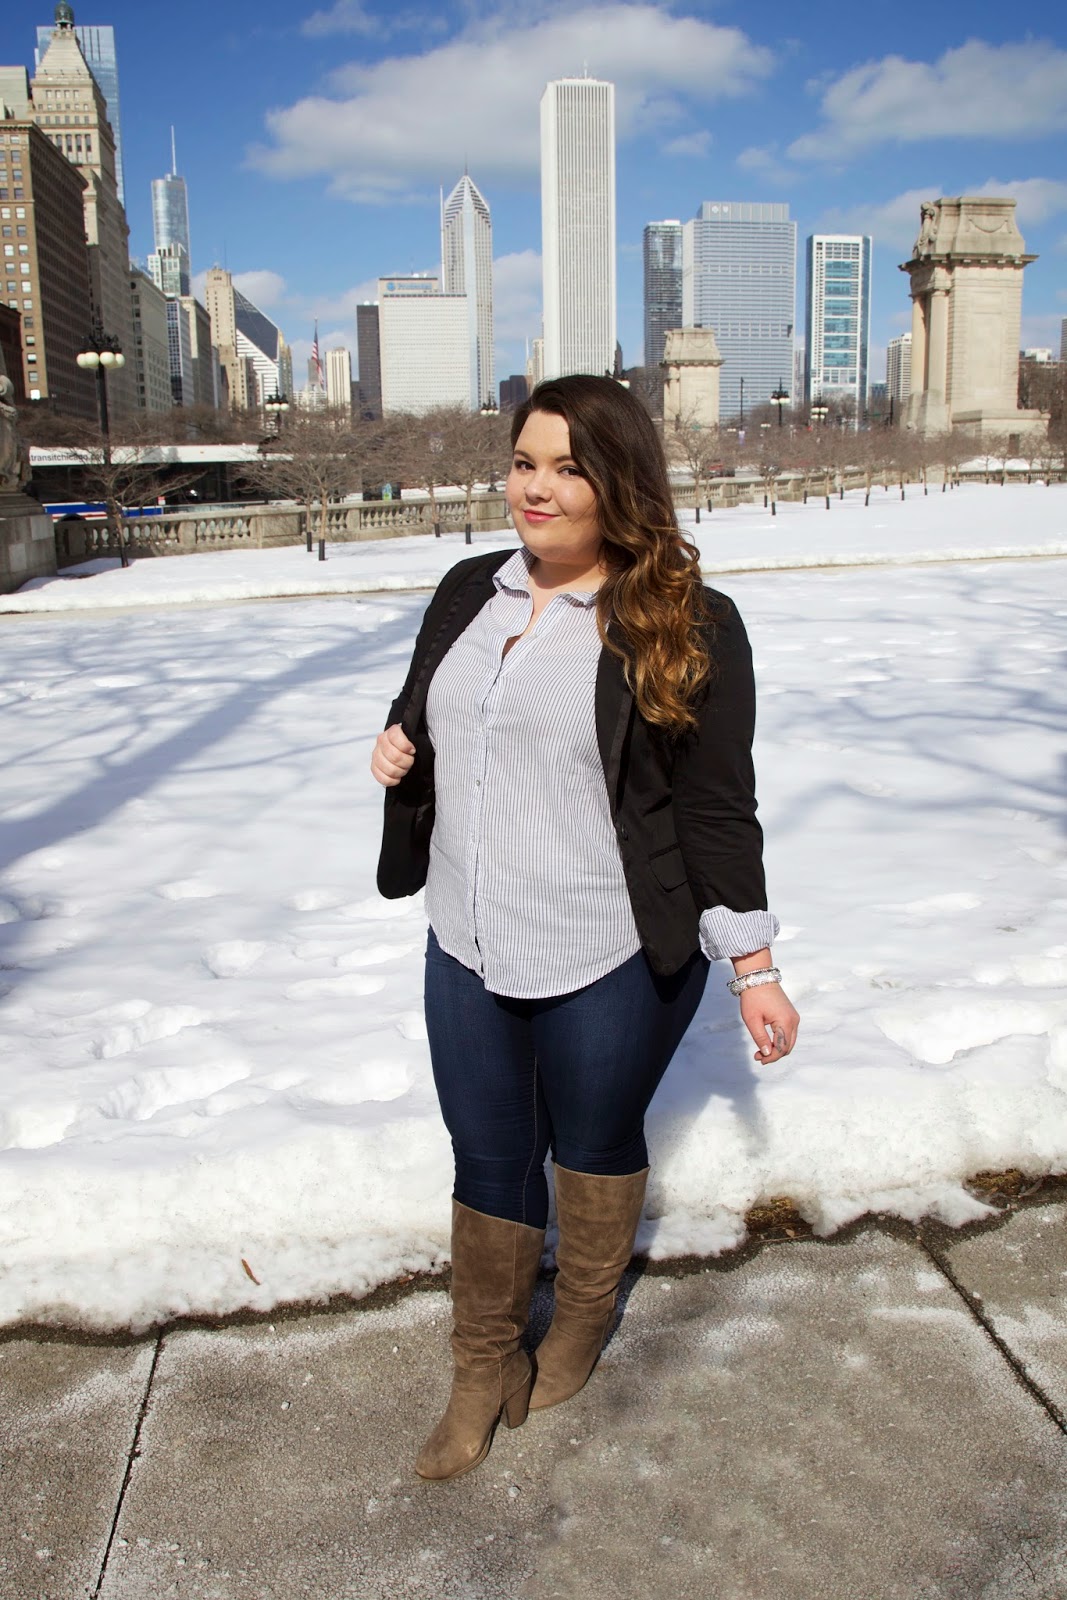 Stylzoo, amazon, chicago, fashion blogger, plus size fashion blogger, natalie craig, natalie in the city, blazer, skinny jeans, comfortable jeans, wide calf boots, plus size blazer, fatshion, thick girls, curvy women, full figured, jeggings, business casual style